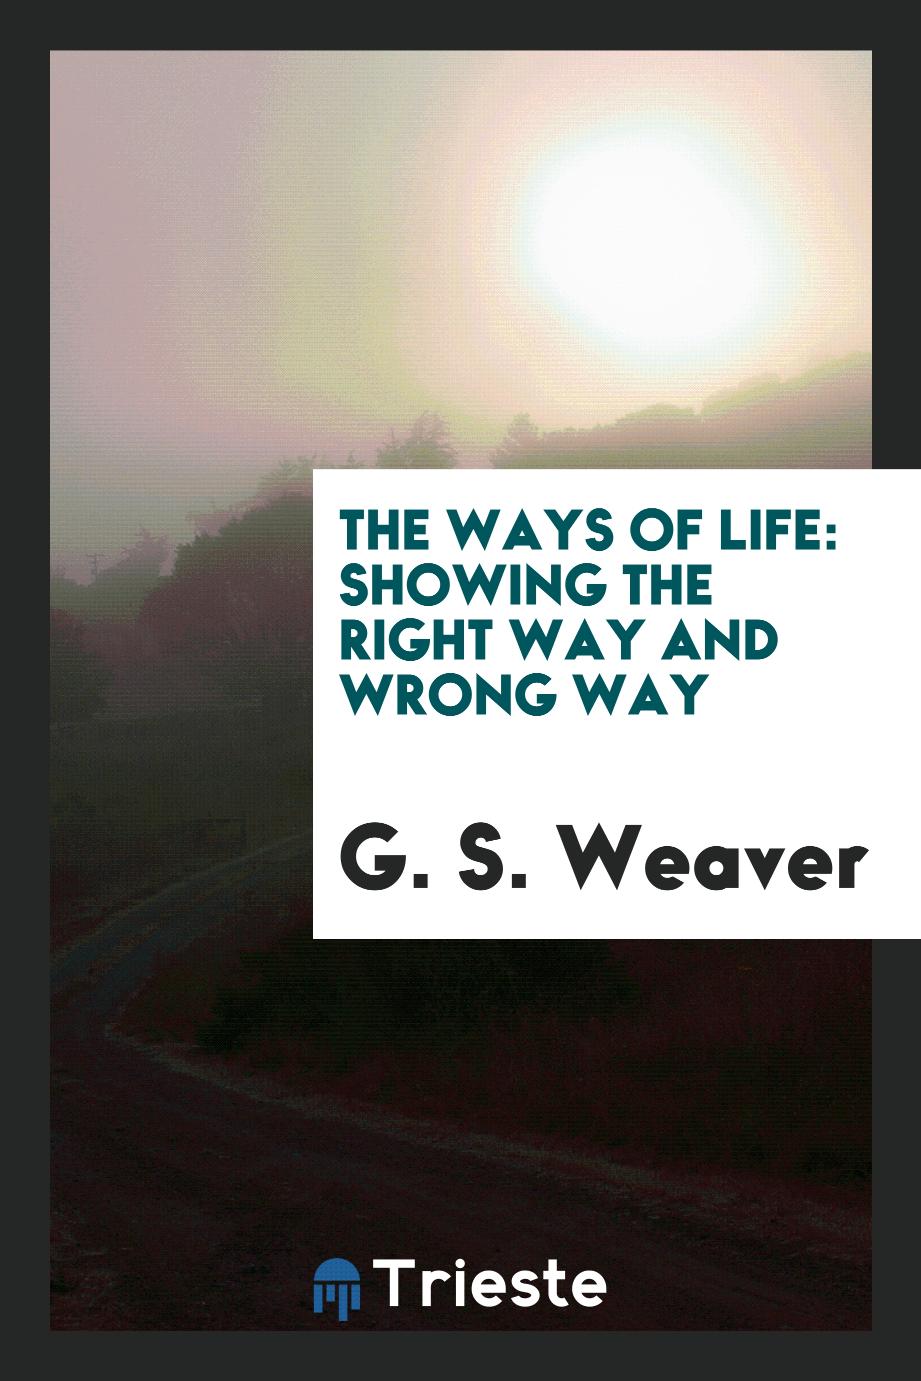 The Ways of Life: Showing the Right Way and Wrong Way